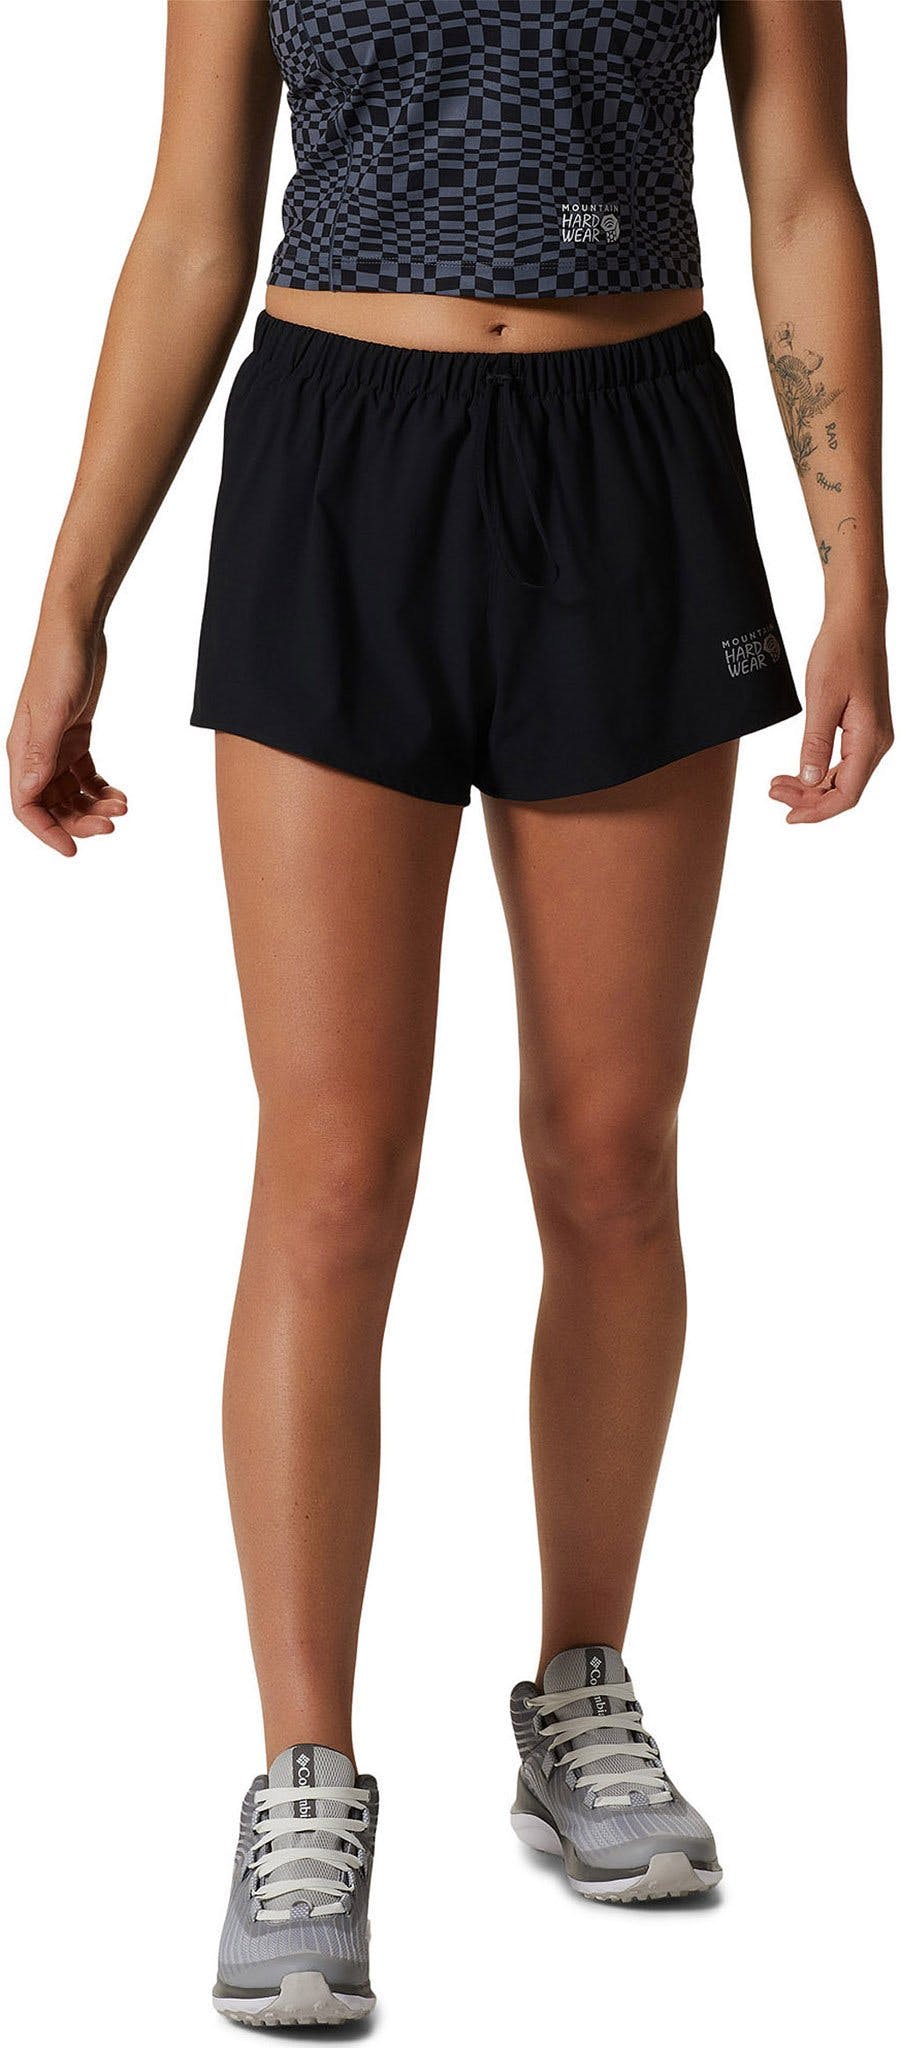 Product image for Shade Lite Short - Women's